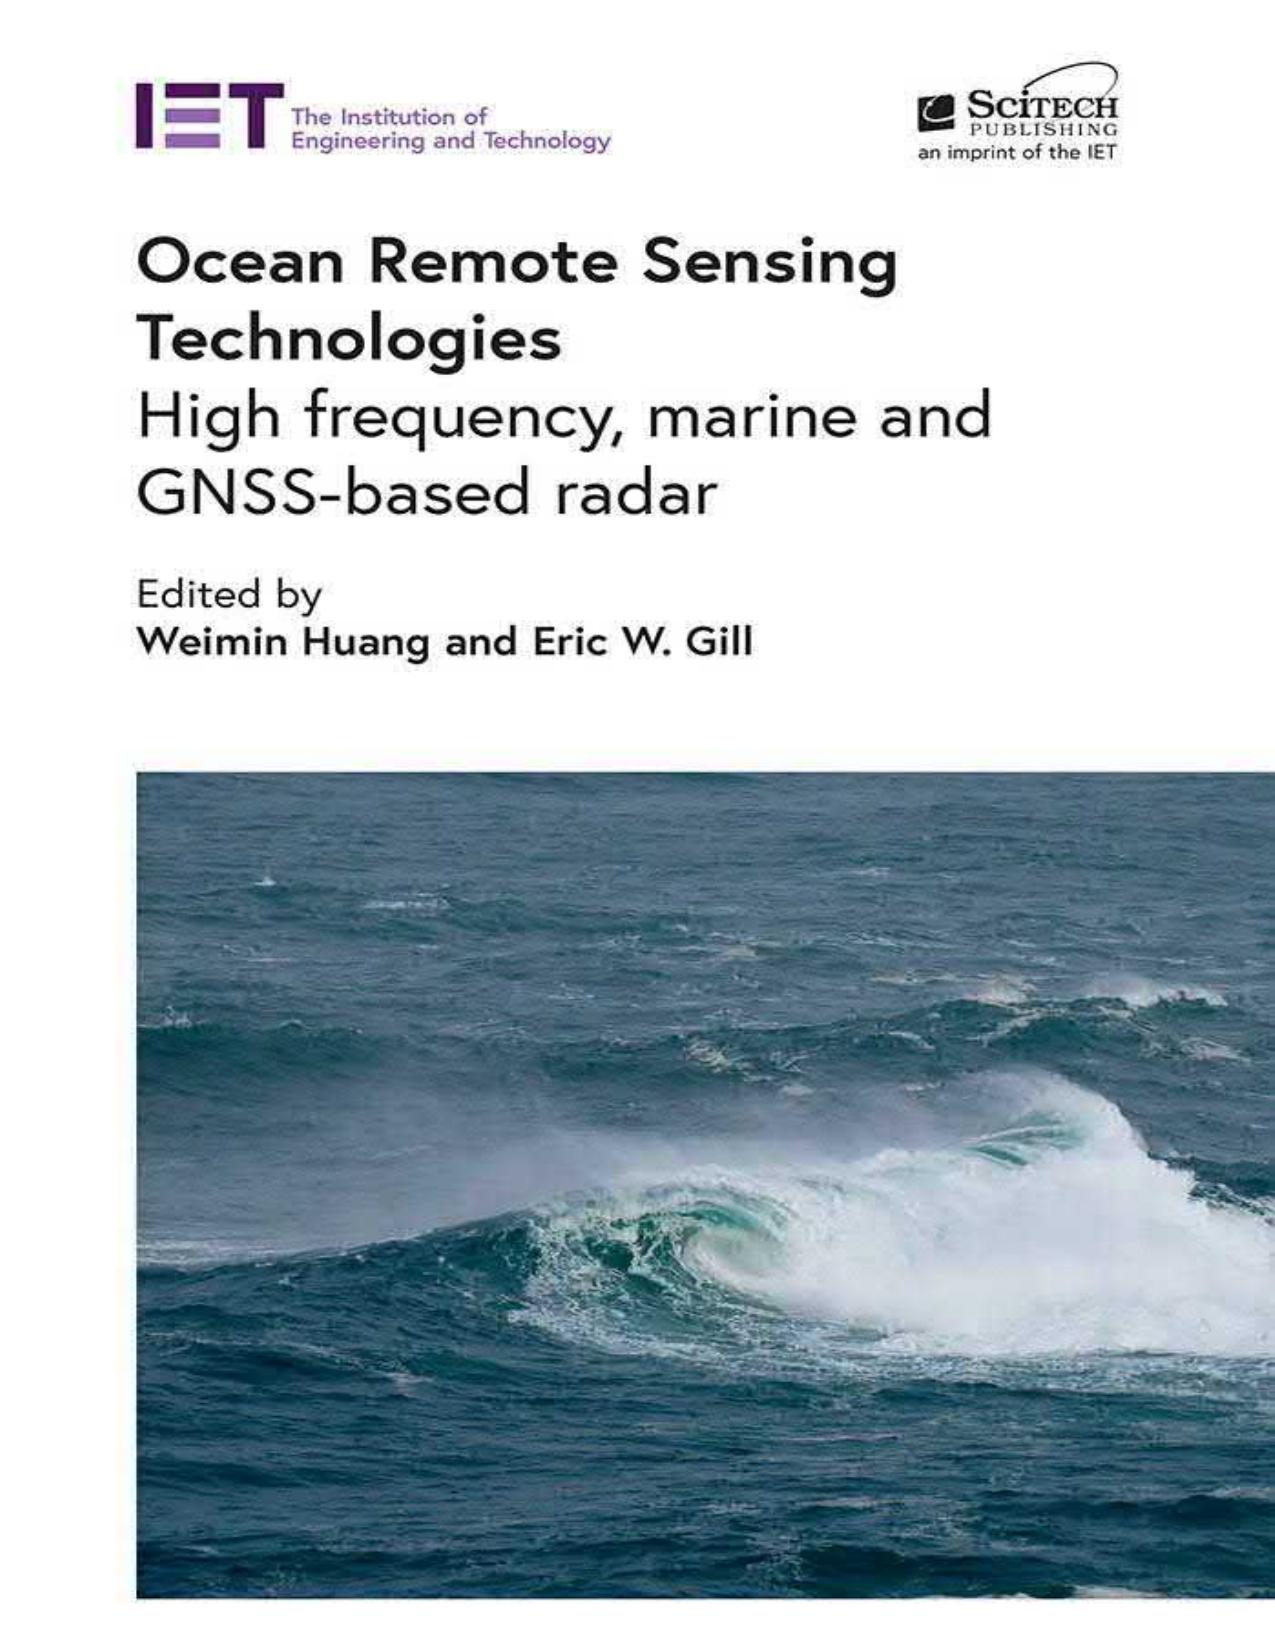 Ocean Remote Sensing Technologies: High frequency, marine and GNSS-based radar by Weimin Huang Eric W. Gill